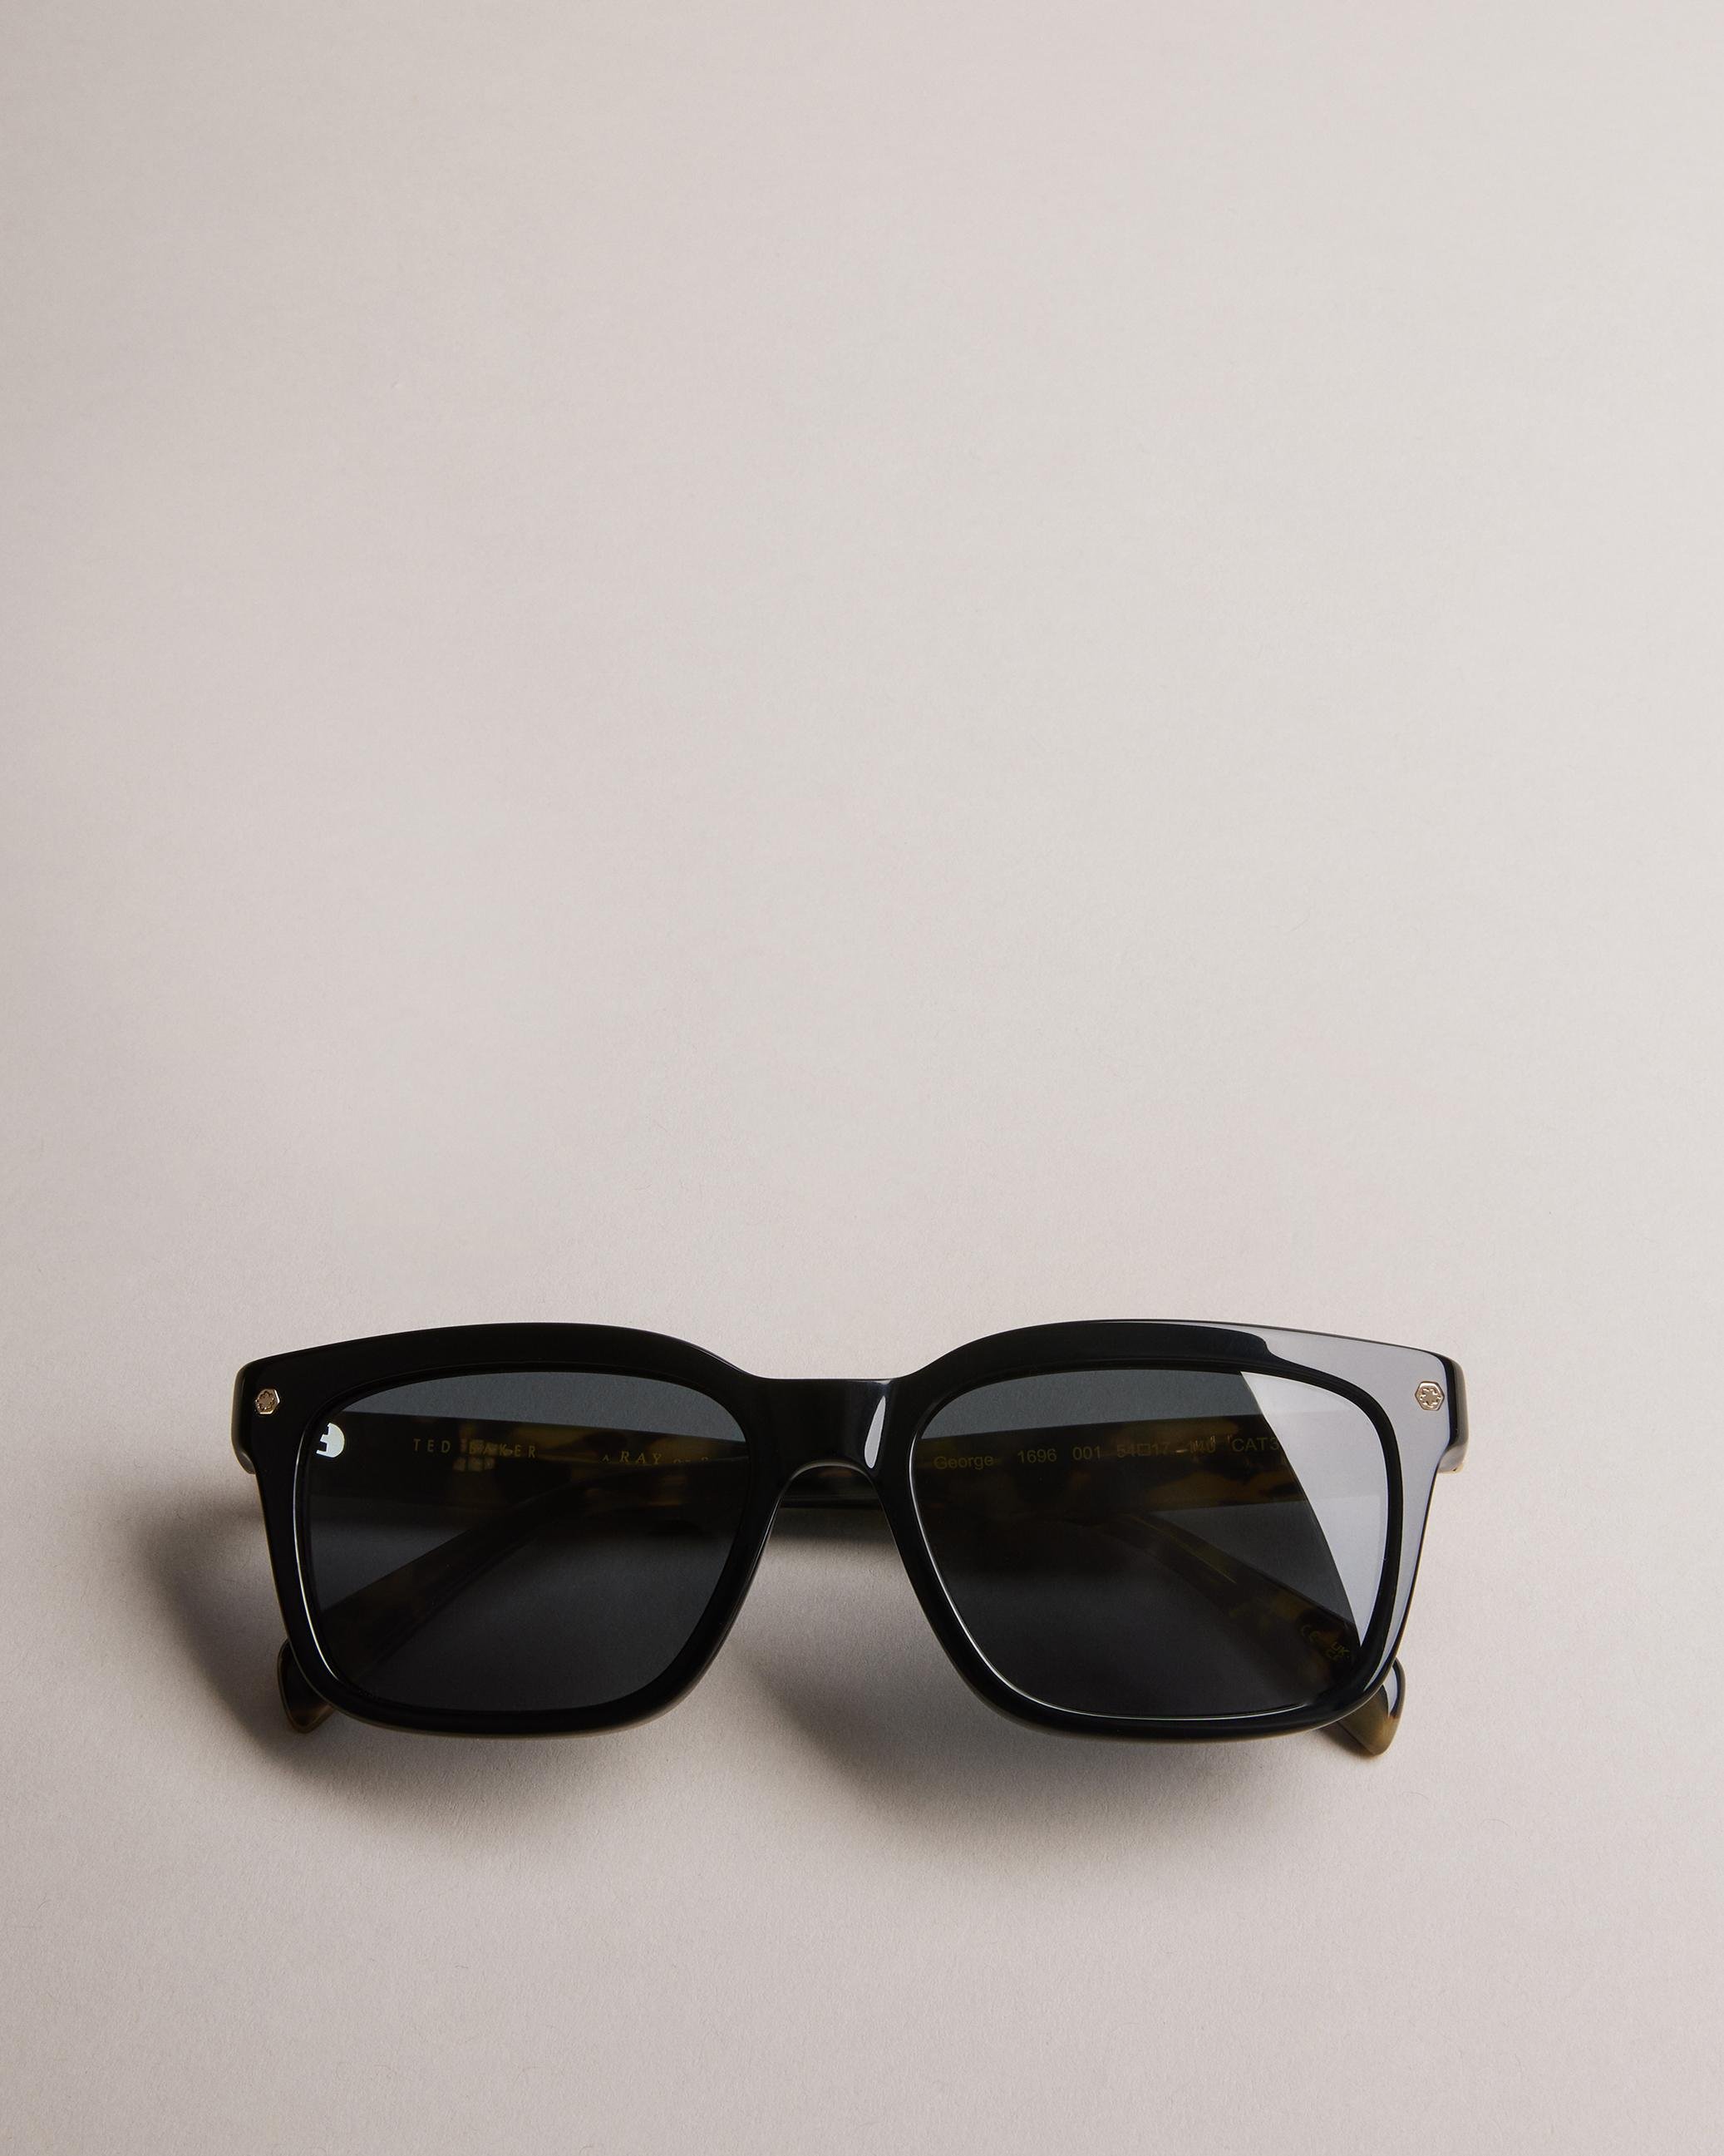 Square Tortoiseshell Arm Sunglasses - GEOORGE - Tan by TED BAKER